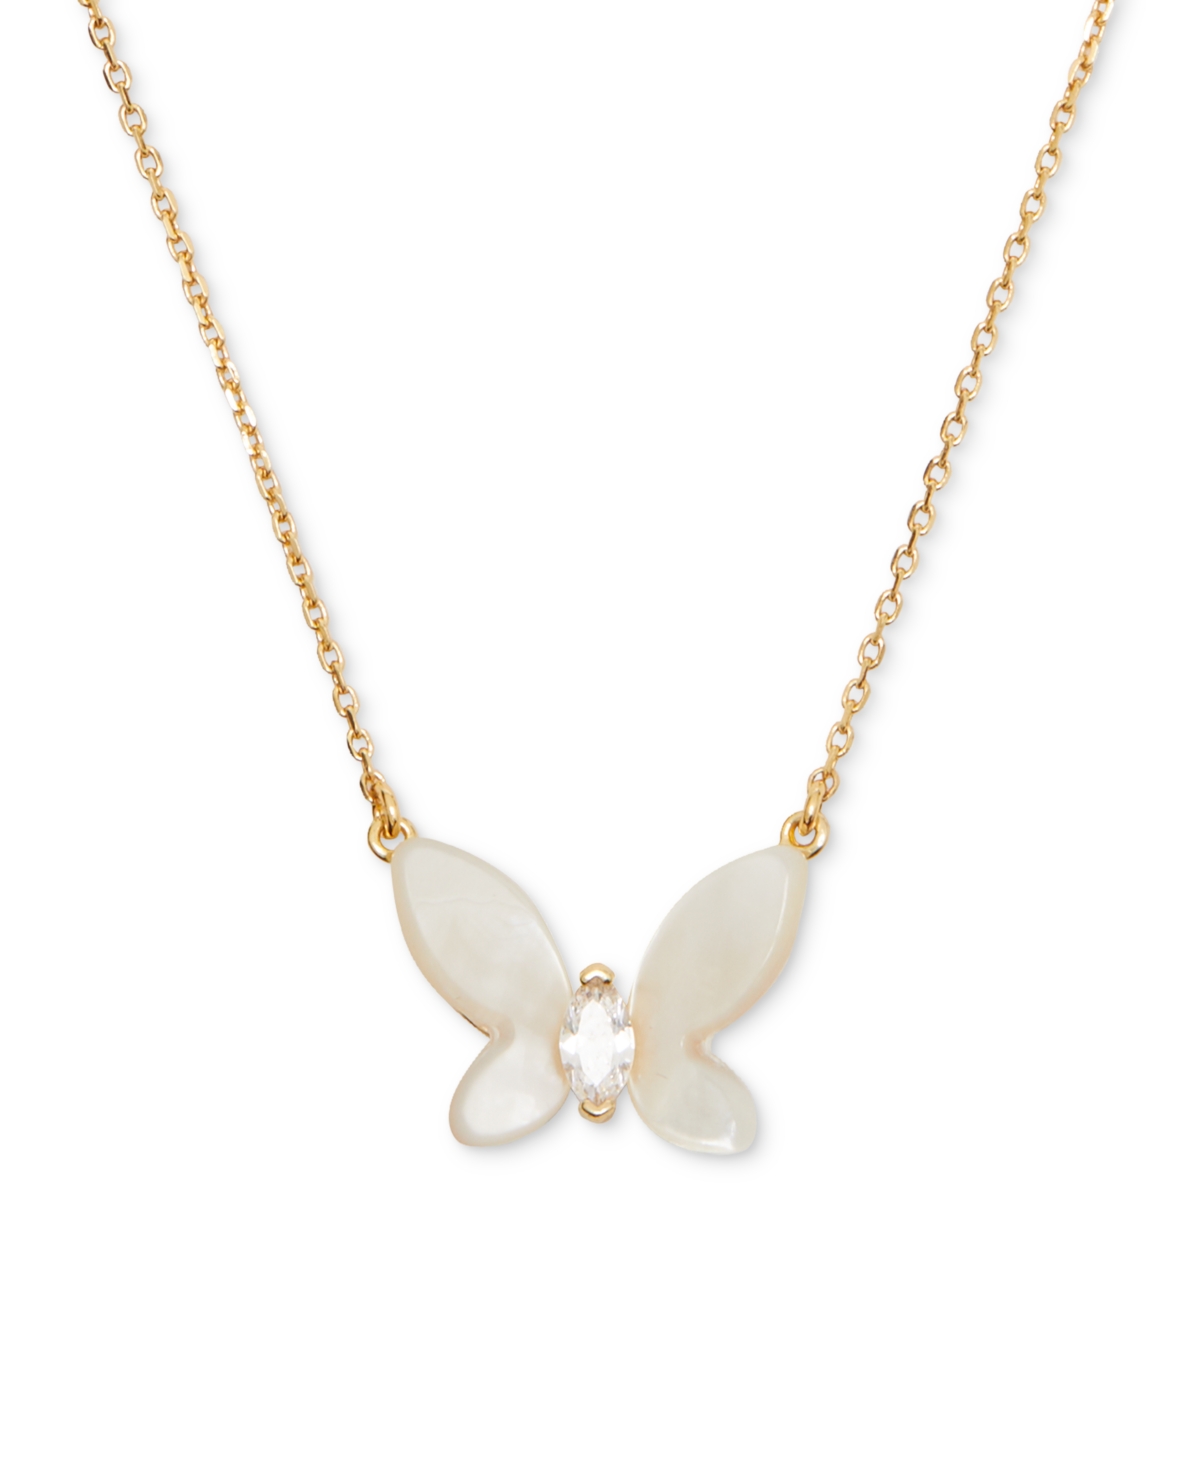 Gold-Tone Cubic Zirconia & Mother-of-Pearl Butterfly Statement Pendant Necklace, 18" + 3" extender - White Multi